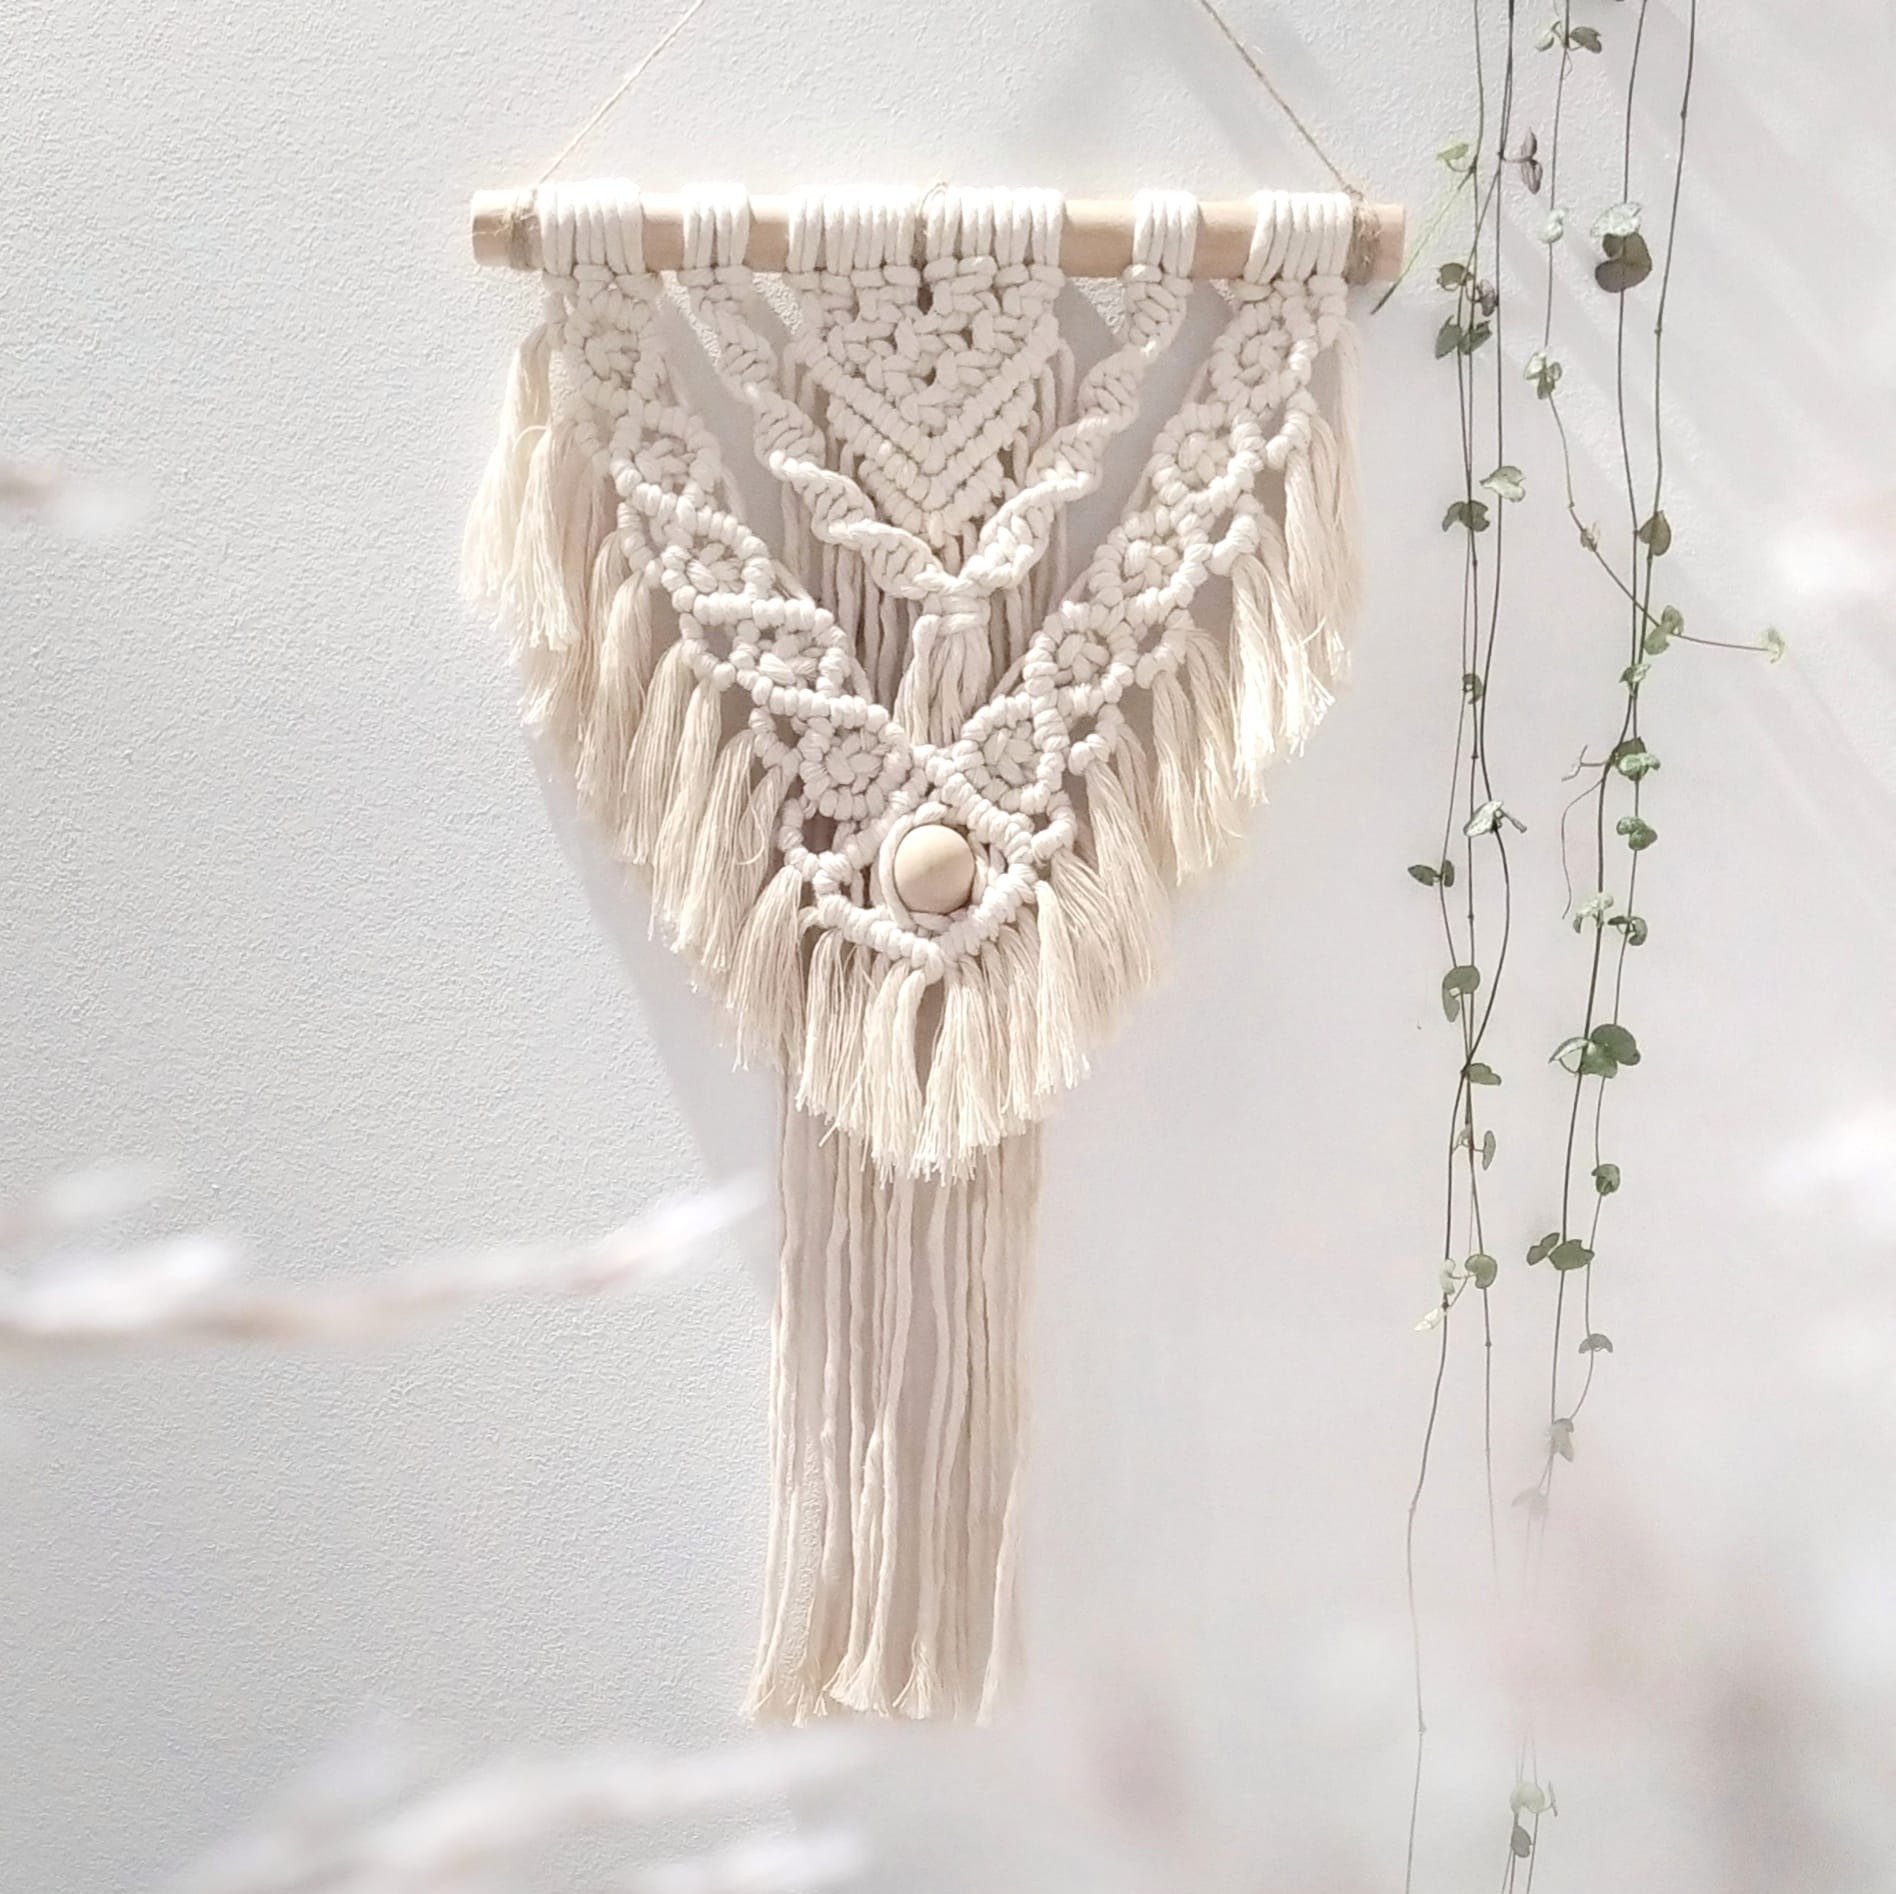 MACRAME TAPIZER, MACRAMÉ TAPIZER, MACRAMÉ TAPIZE, EASY STEP BY